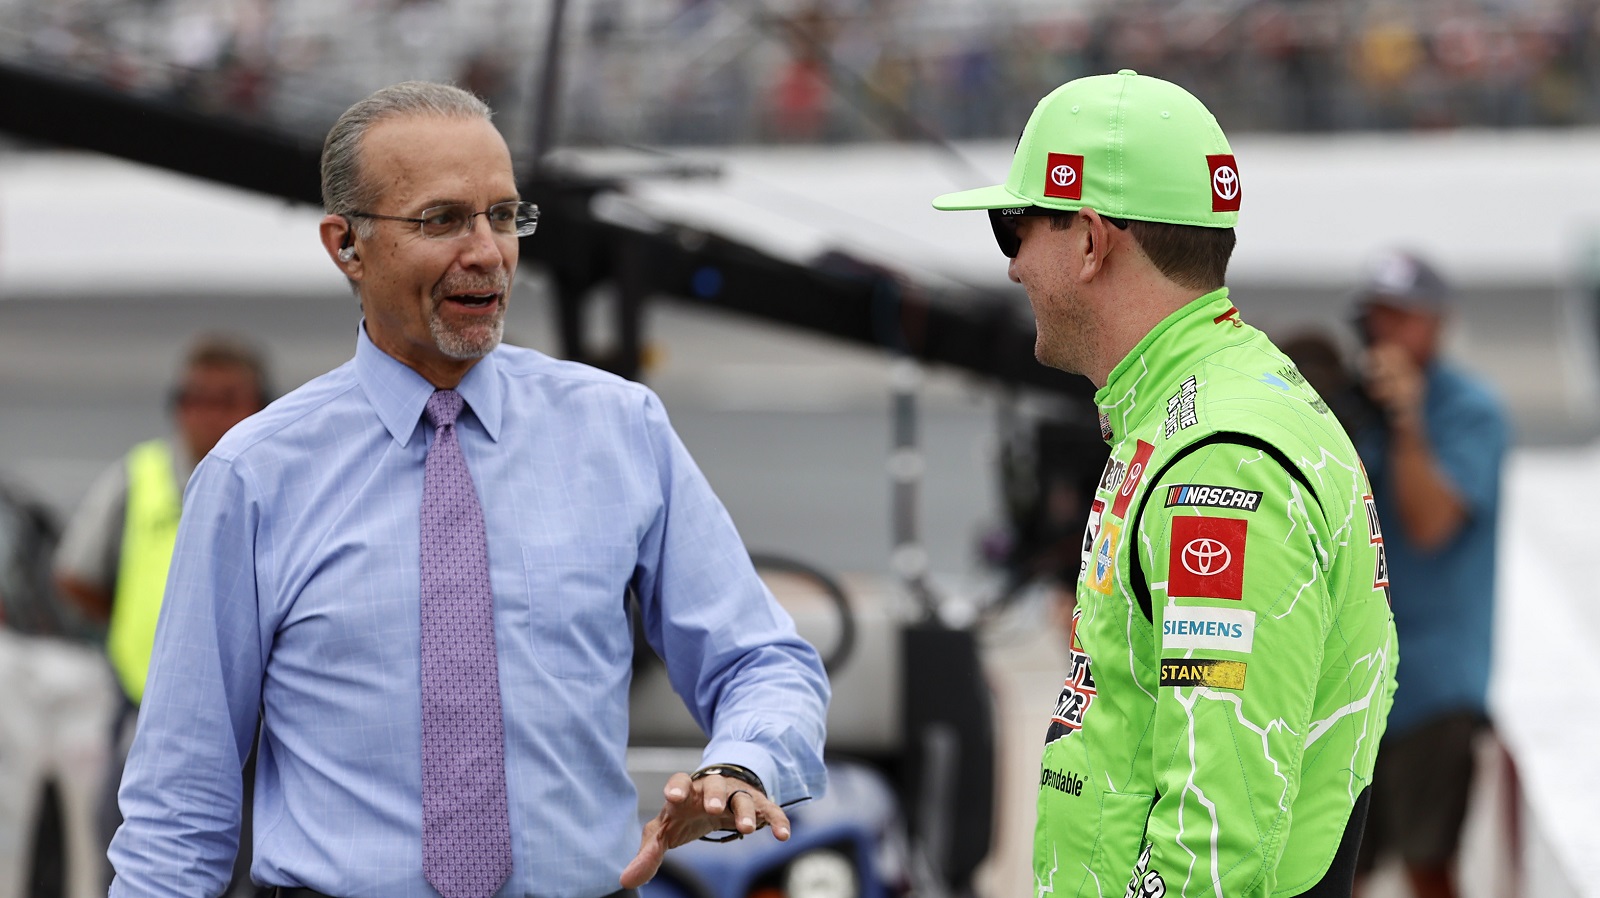 Kyle Petty talks to Kyle Busch before the Foxwoods Resort Casino 301 on July 18, 2021, at New Hampshire Motor Speedway in Loudon, New Hampshire. | Fred Kfoury III/Icon Sportswire via Getty Images